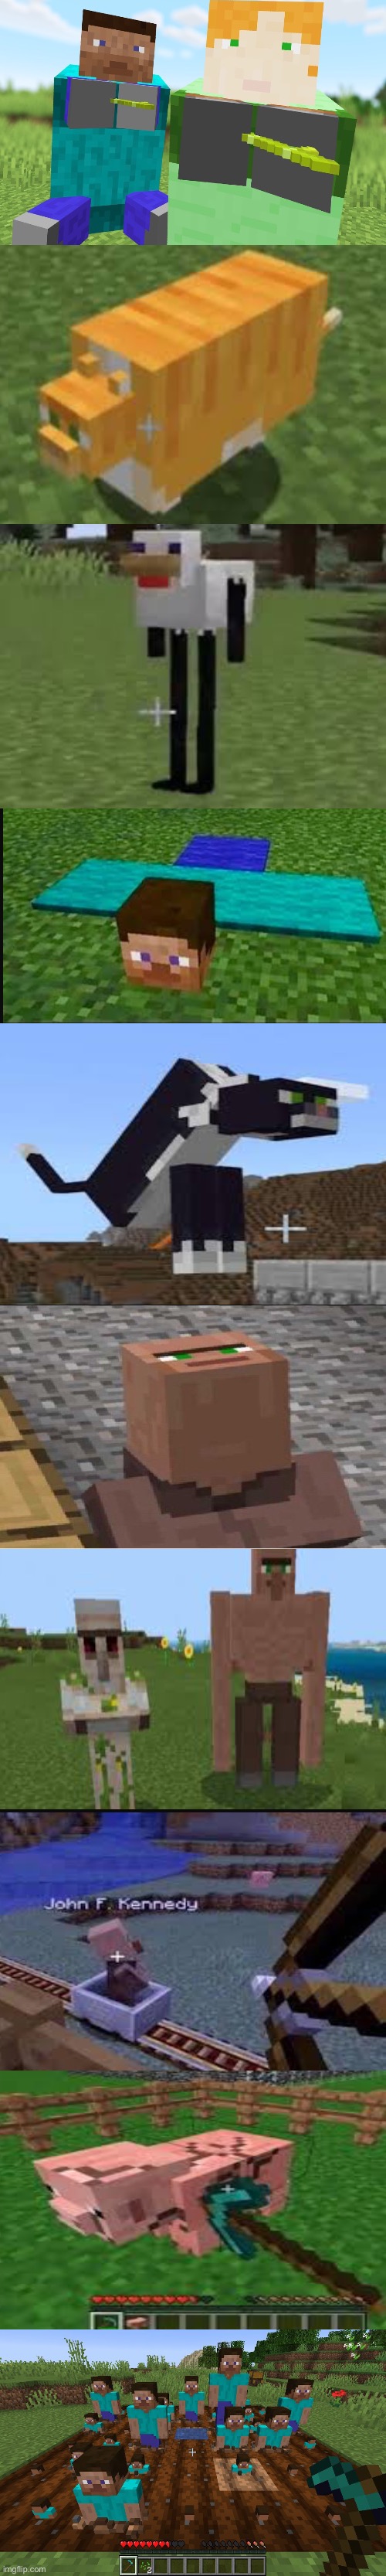 CuRsEd Minecraft images | image tagged in cursed,cursed minecraft | made w/ Imgflip meme maker